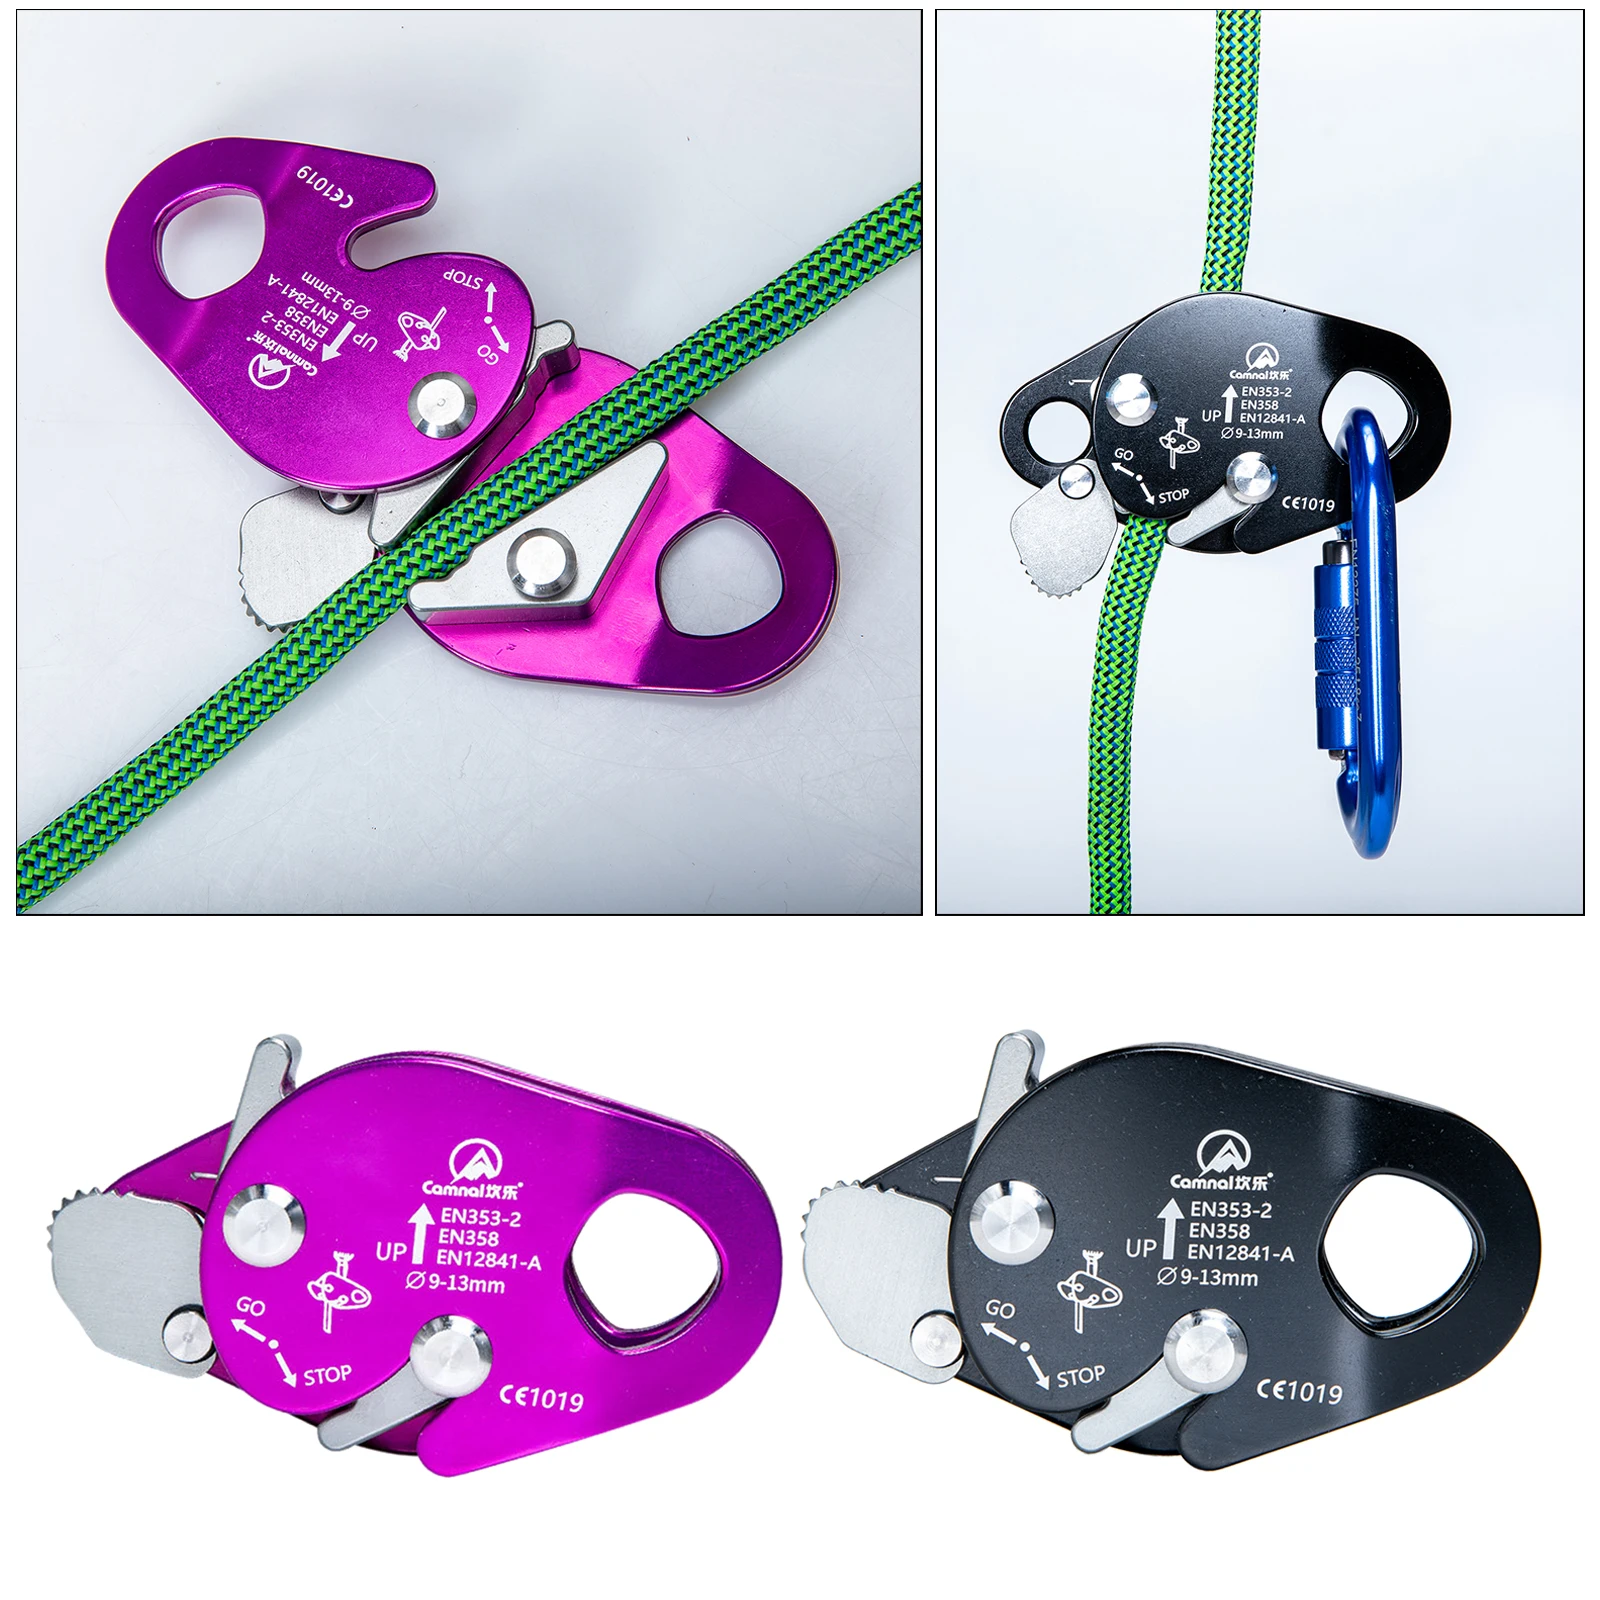 22KN Safety Arborist Rope Grab Rock Tree Climbing Stop Descender Pulley Device Climbing Fall Arrester Device Ladder Equipment